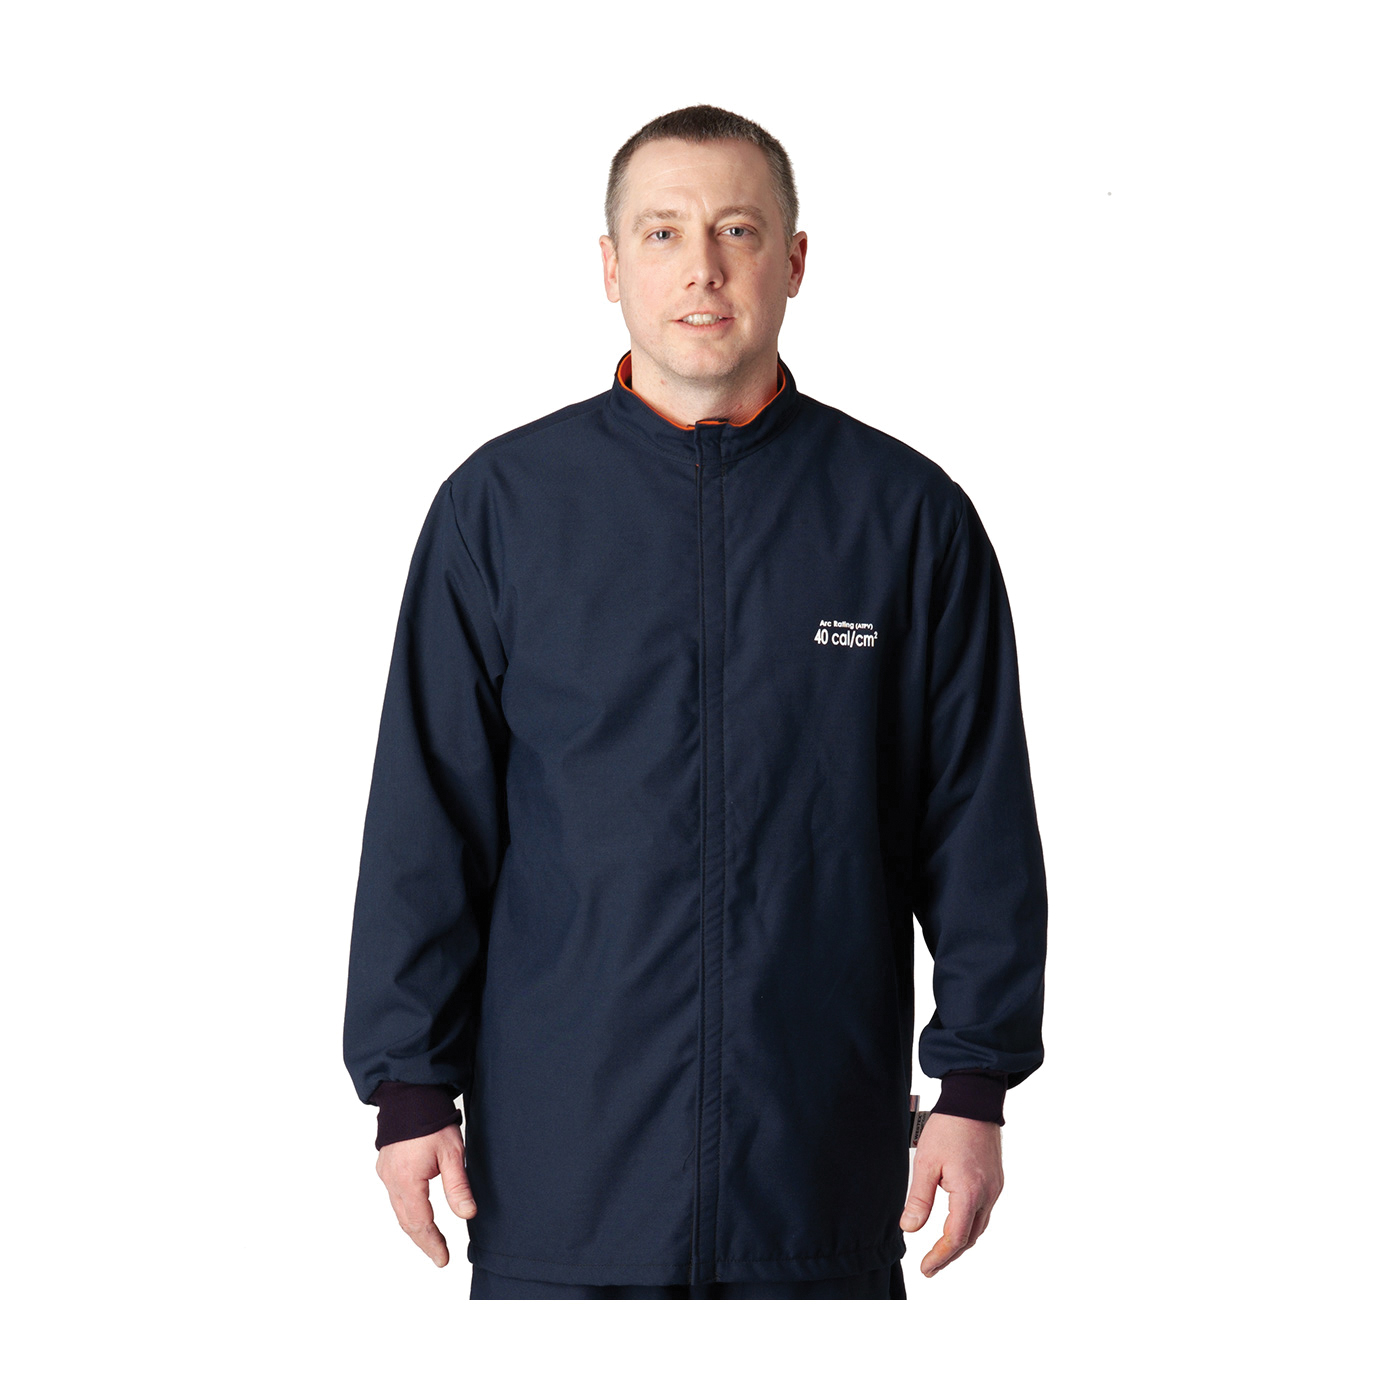 PIP® 9100-524ULT/4X Ultra Light Arc and Flame Resistant Jacket, 4XL, Navy Blue, DuPont™ Protera®/Westex® Ultrasoft, 60 to 62 in Chest, Resists: Arc and Flame, ASTM F1506-10a, ASTM F2178-12